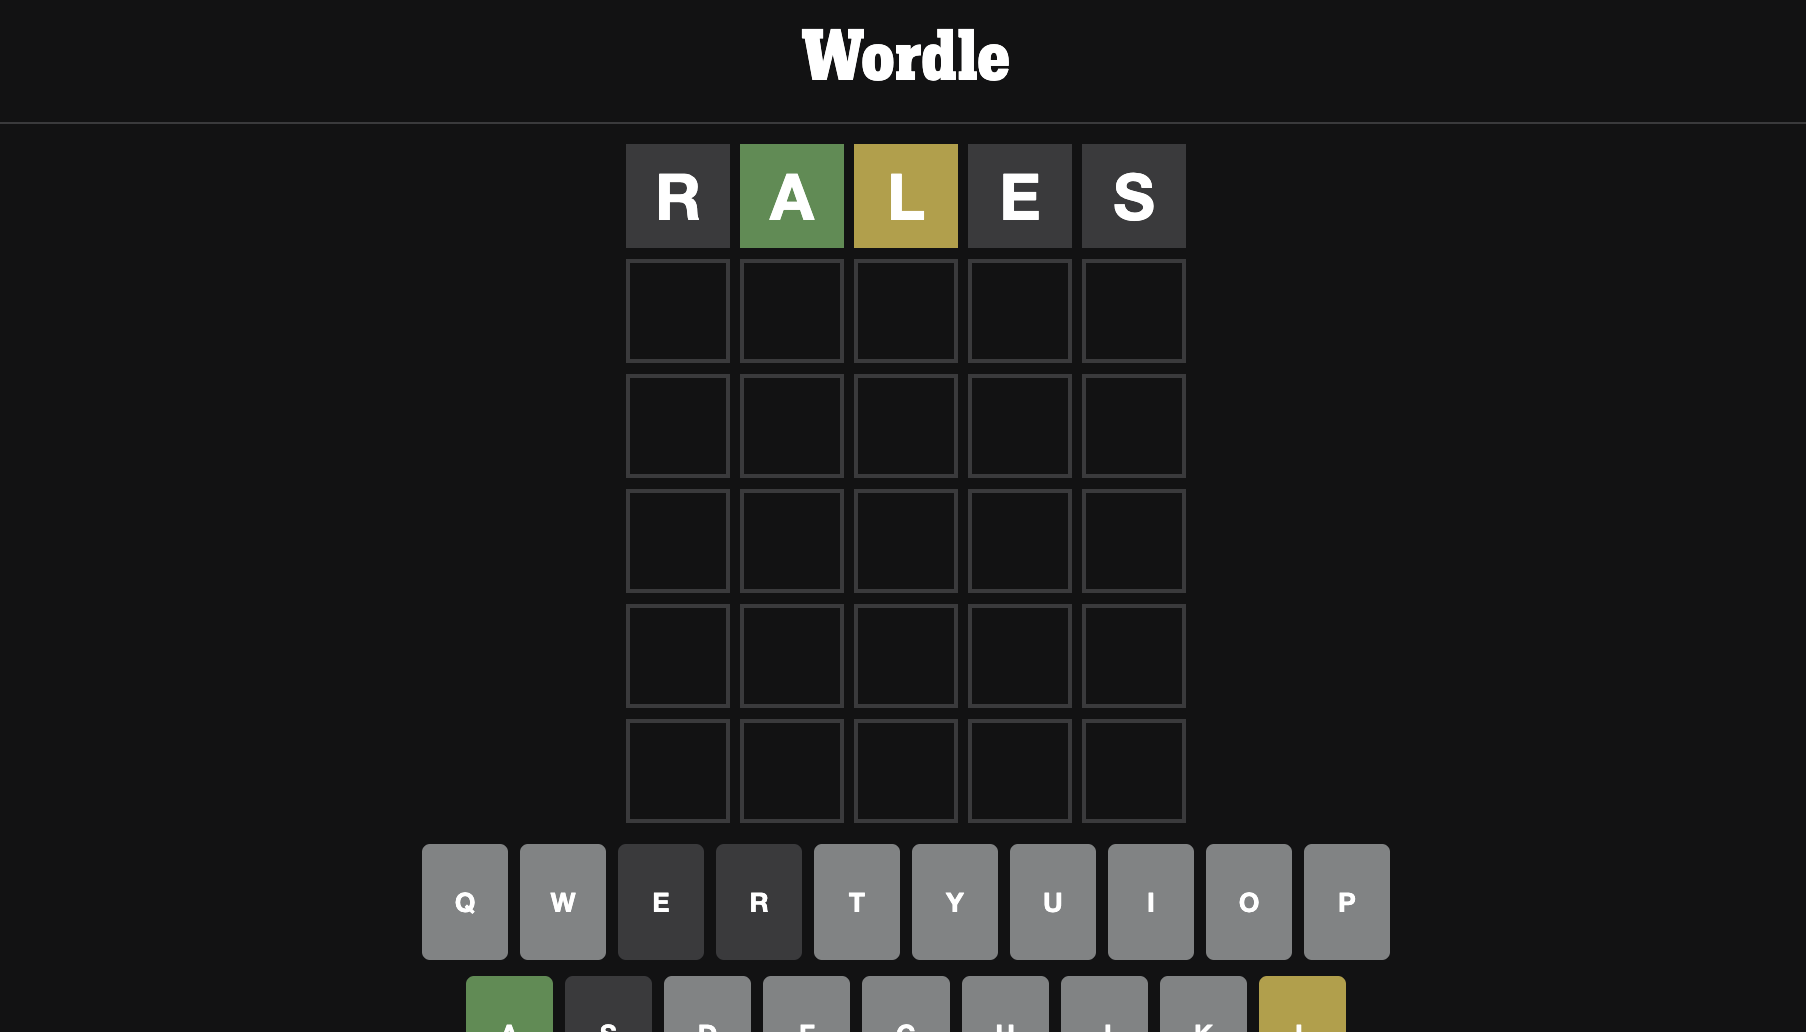 Wordle grid with first word played is Rales.